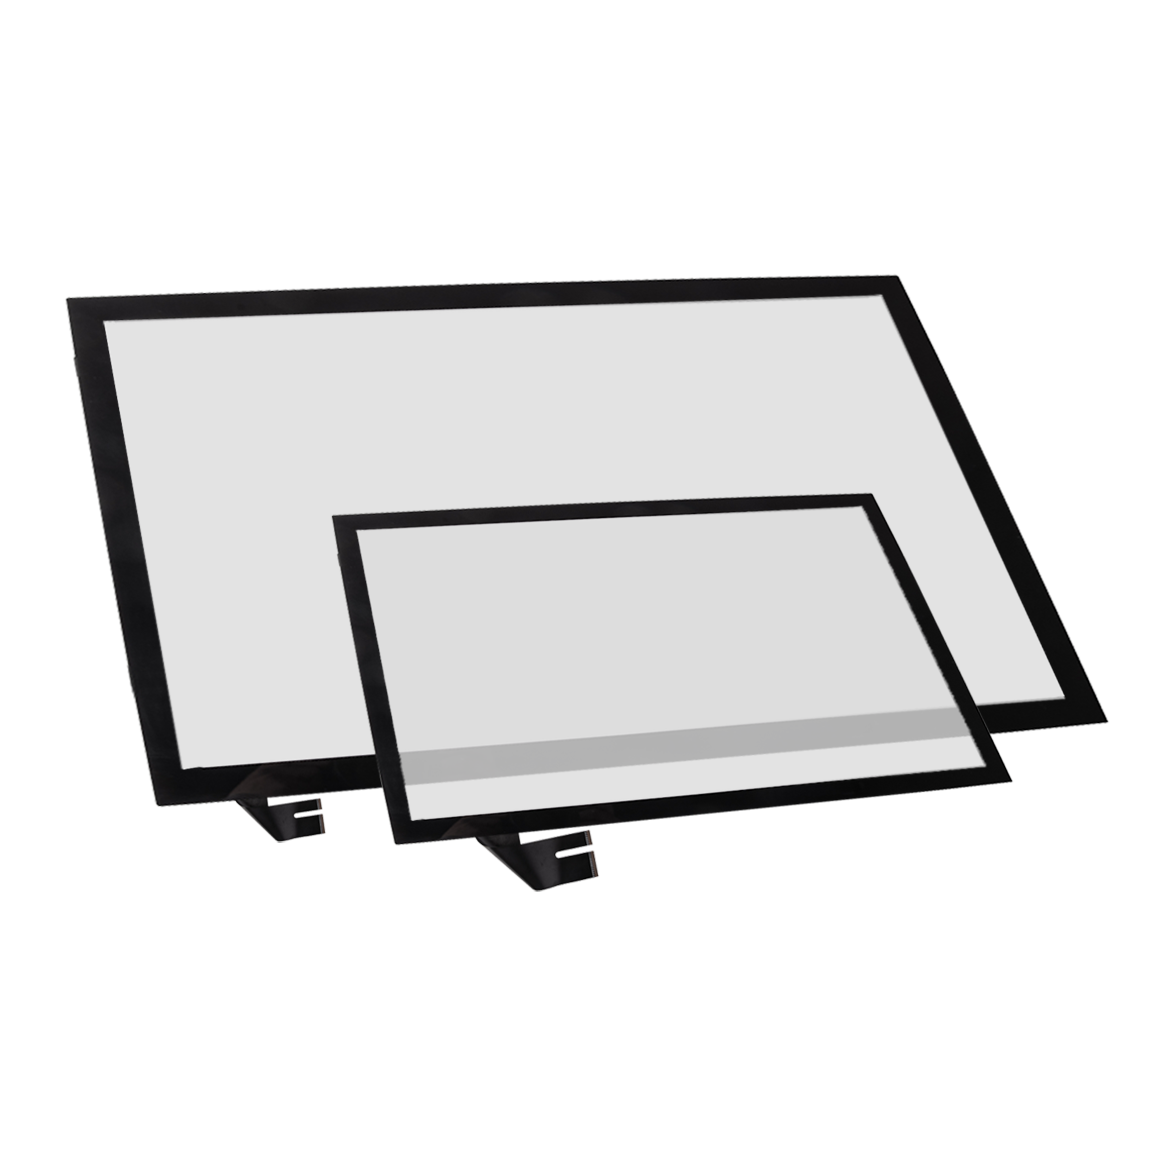 17inch PCAP Touch Panel Features Imaj